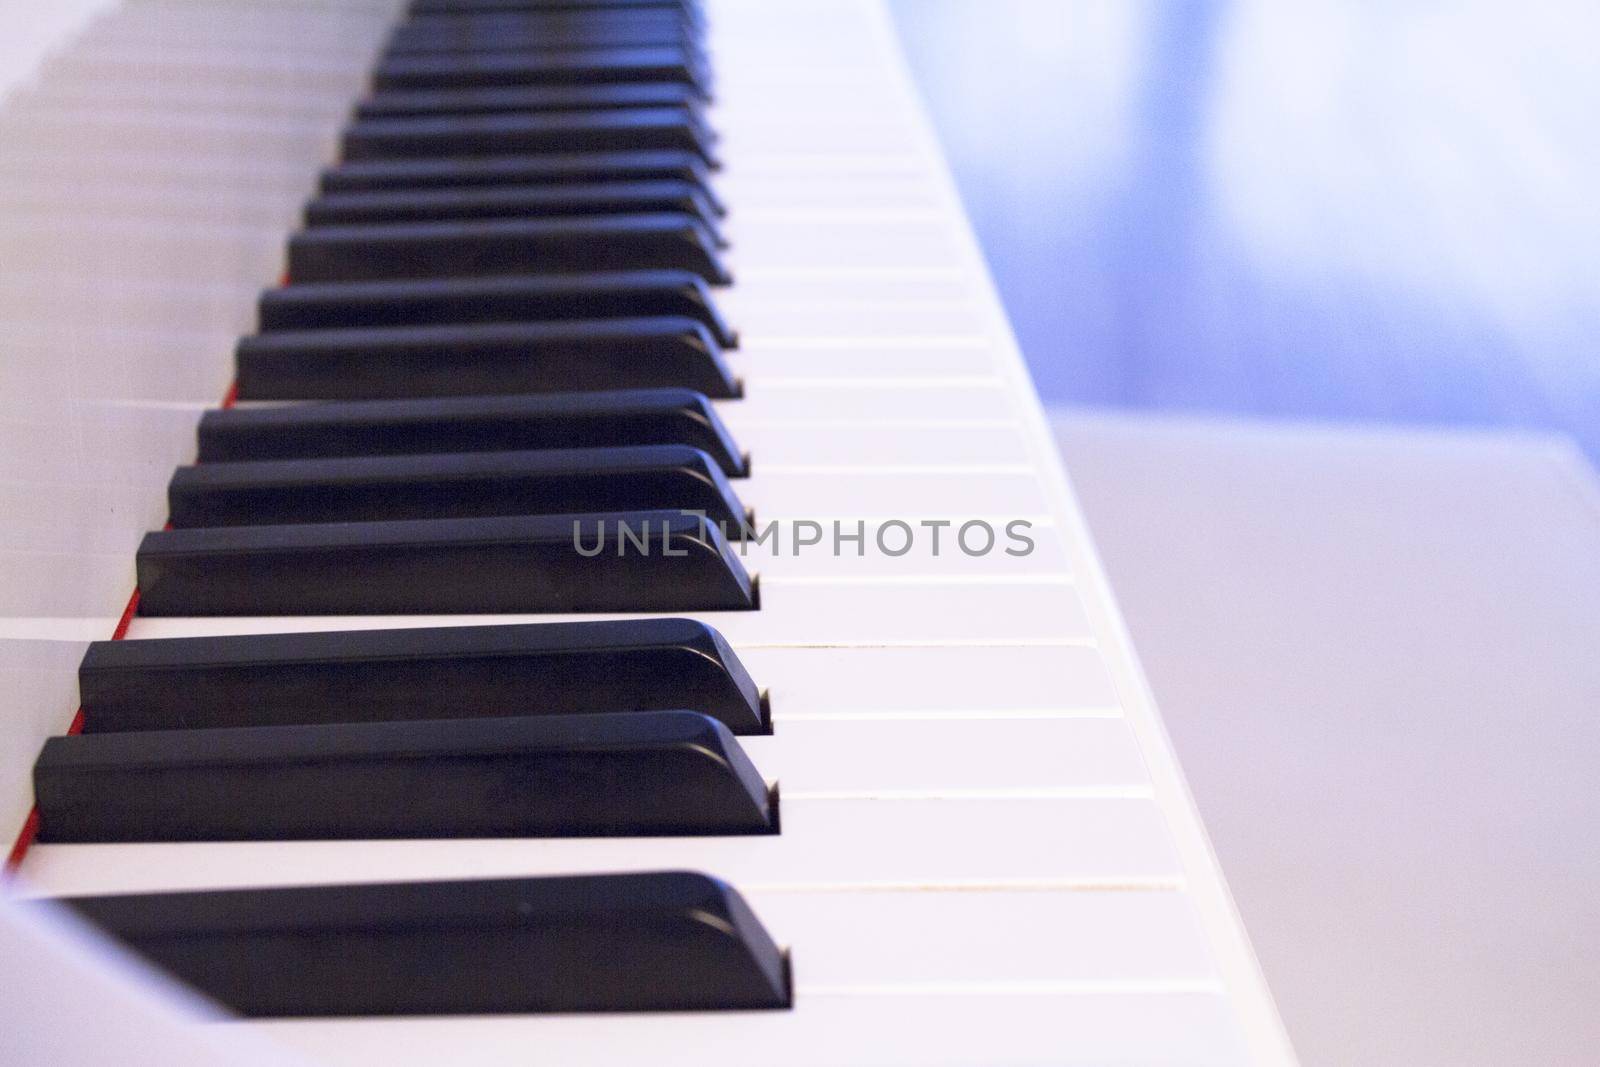 Part of the keyboard of a piano in white color by GemaIbarra